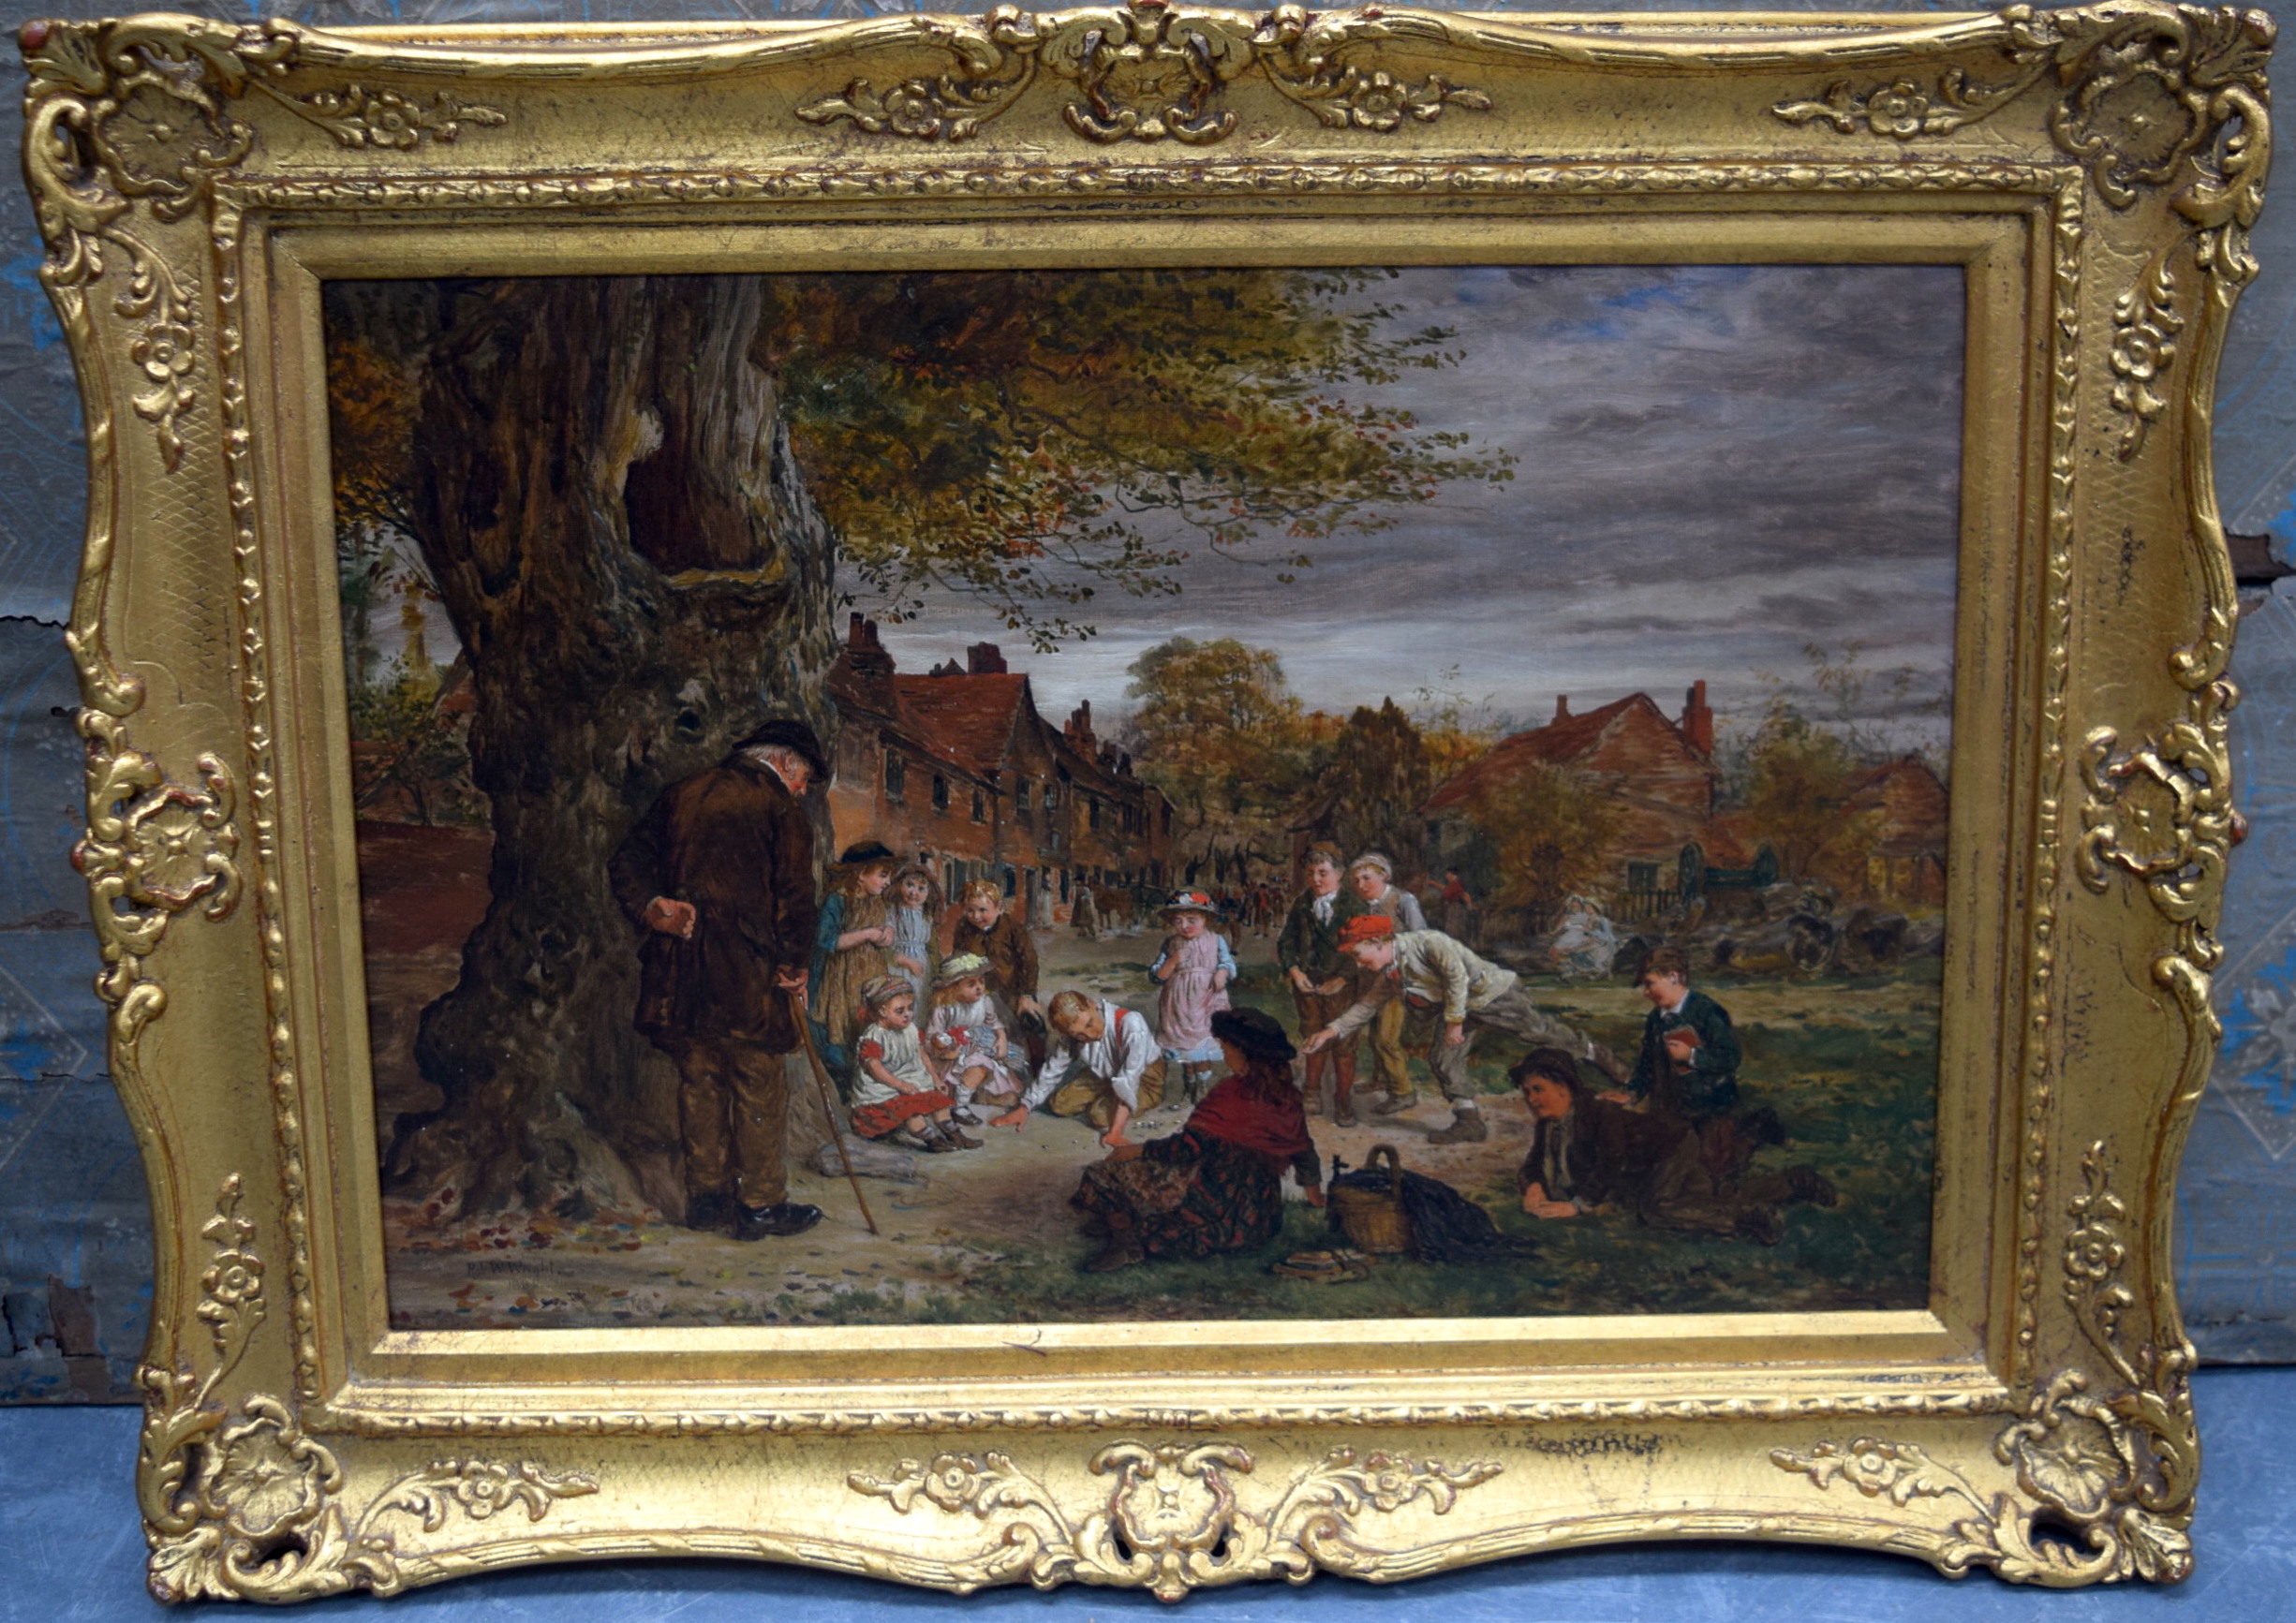 ROBERT WILLIAM WRIGHT (act 1870-1906) FRAMED OIL ON BOARD, signed & dated, children playing in the